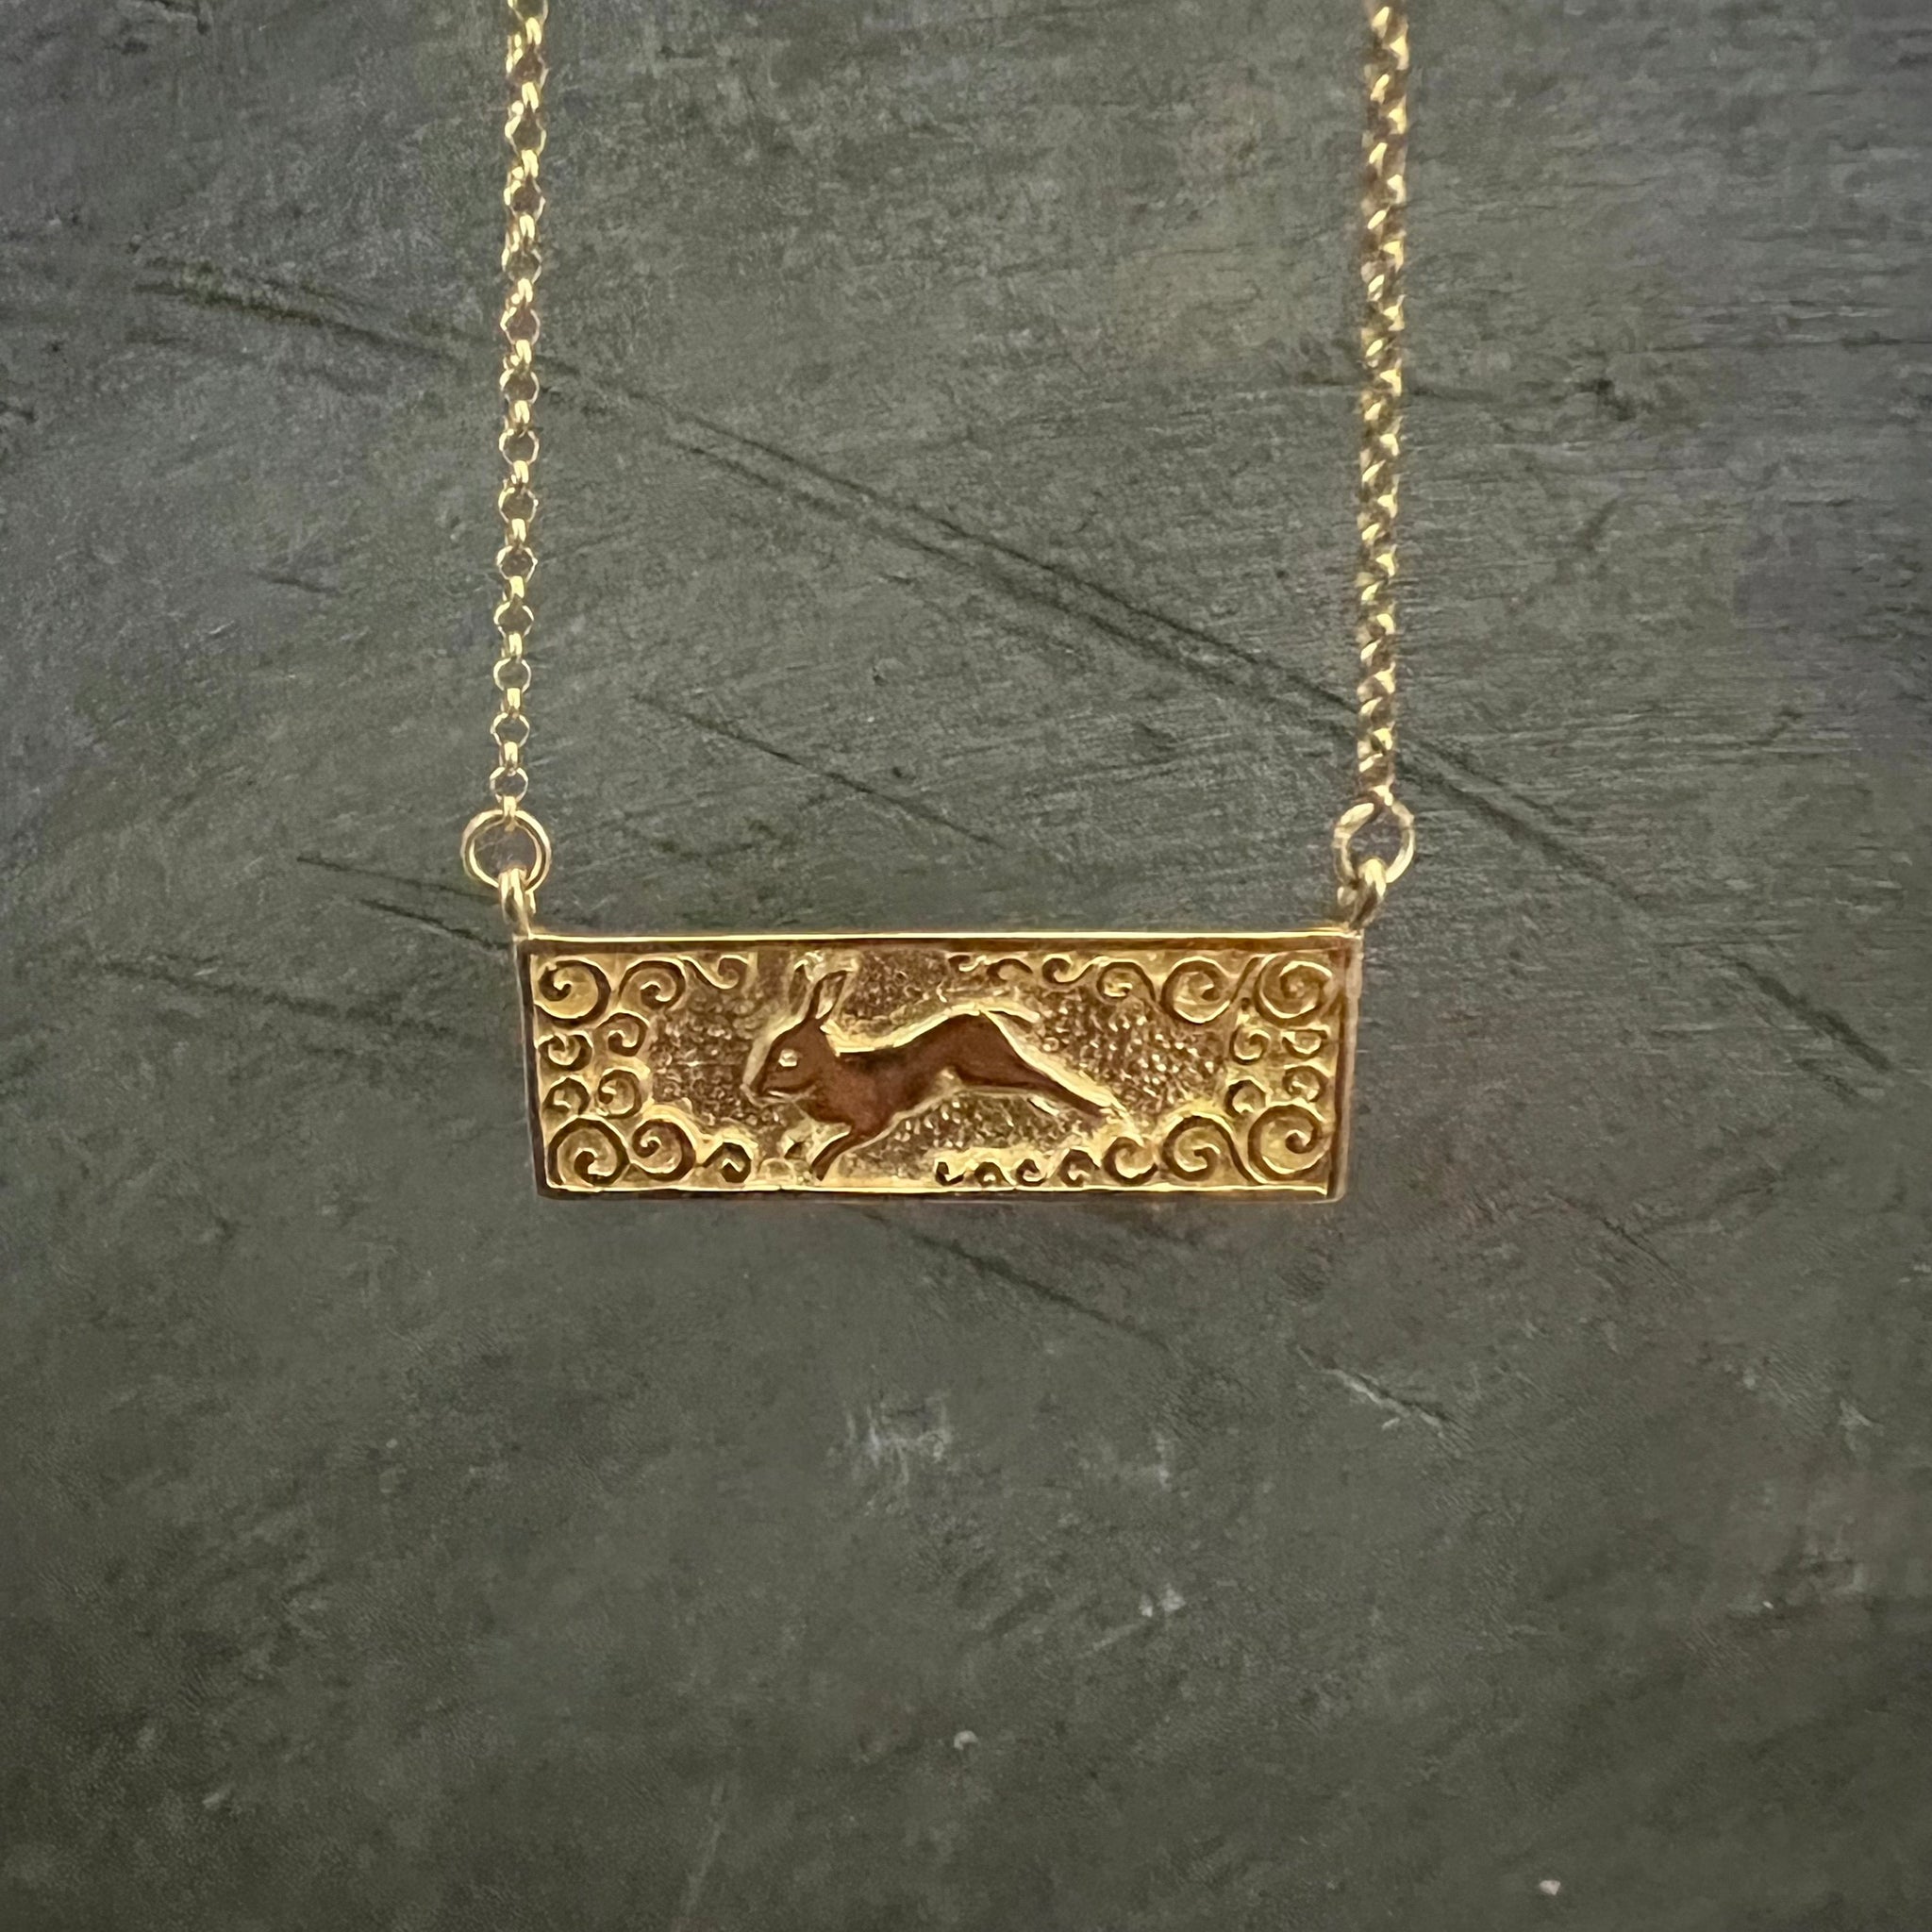 NEW ARRIVAL! Year of the Rabbit Necklace